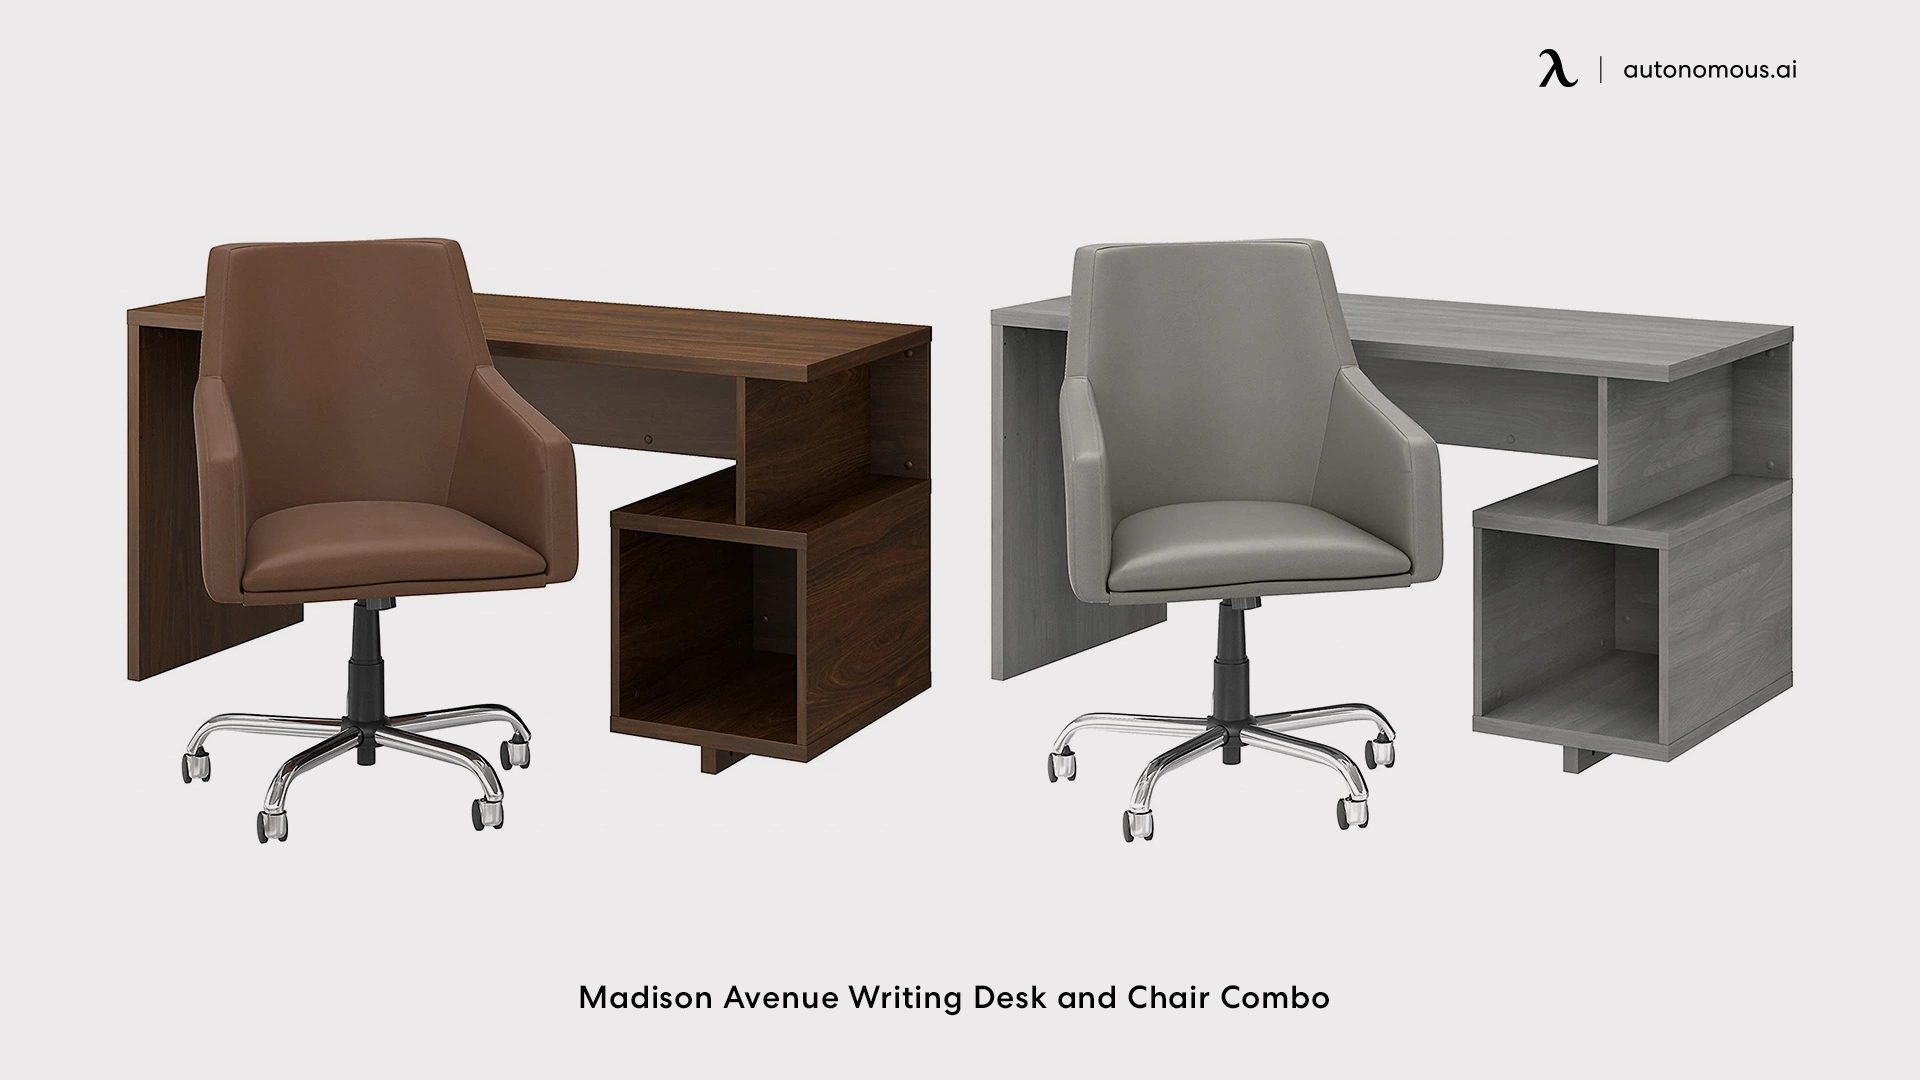 Madison Avenue Writing Desk and Chair Combo